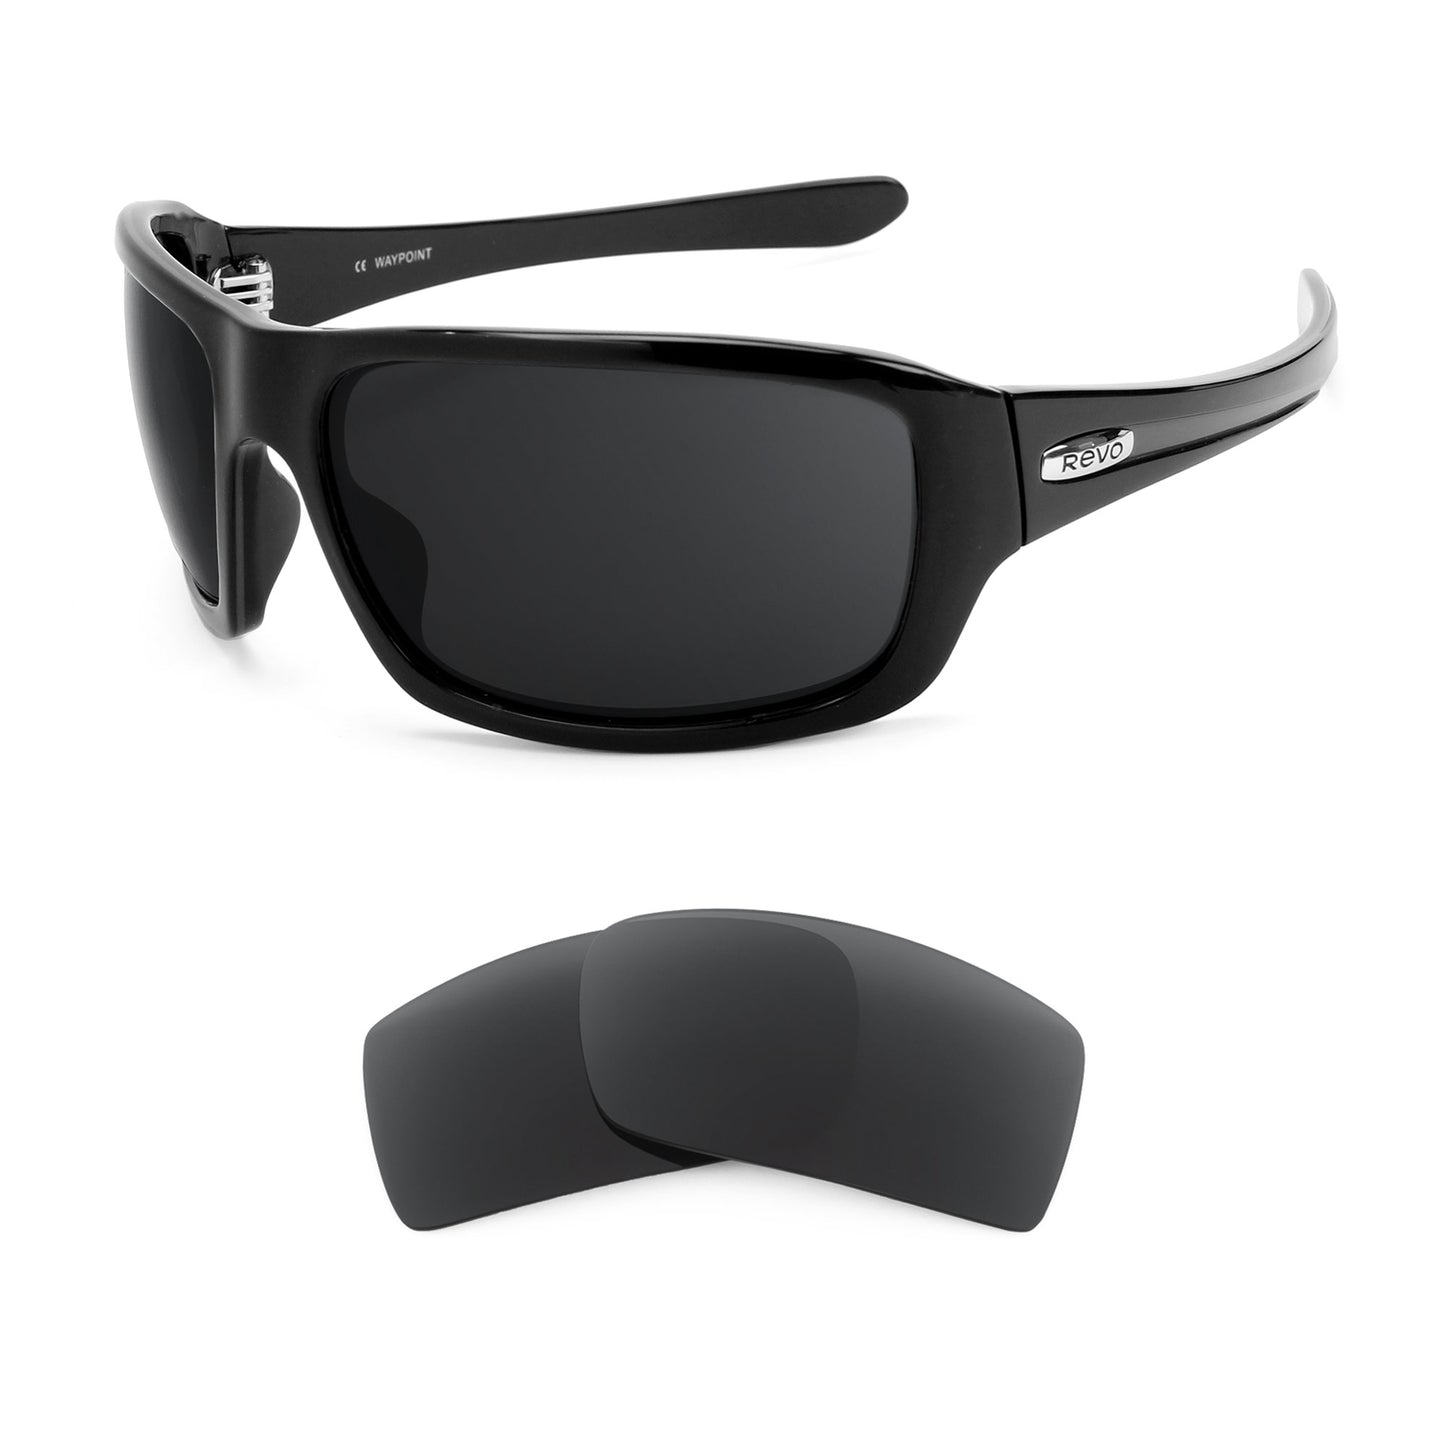 Revo Waypoint RE2044 sunglasses with replacement lenses